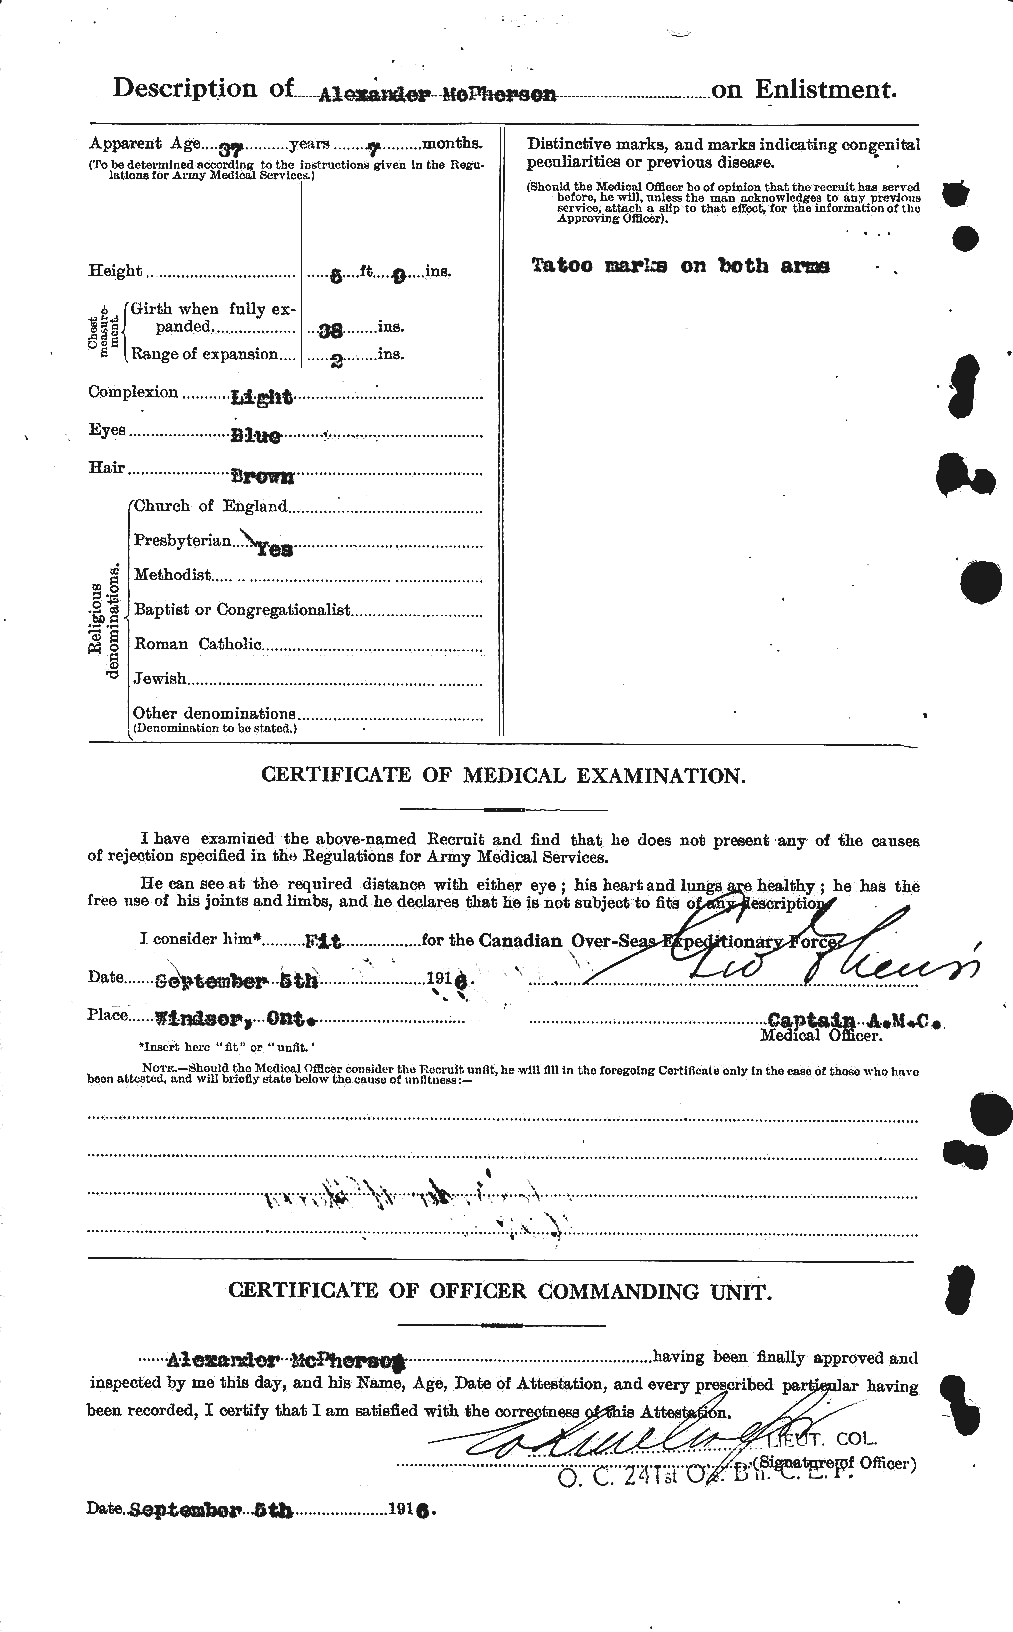 Personnel Records of the First World War - CEF 541337b